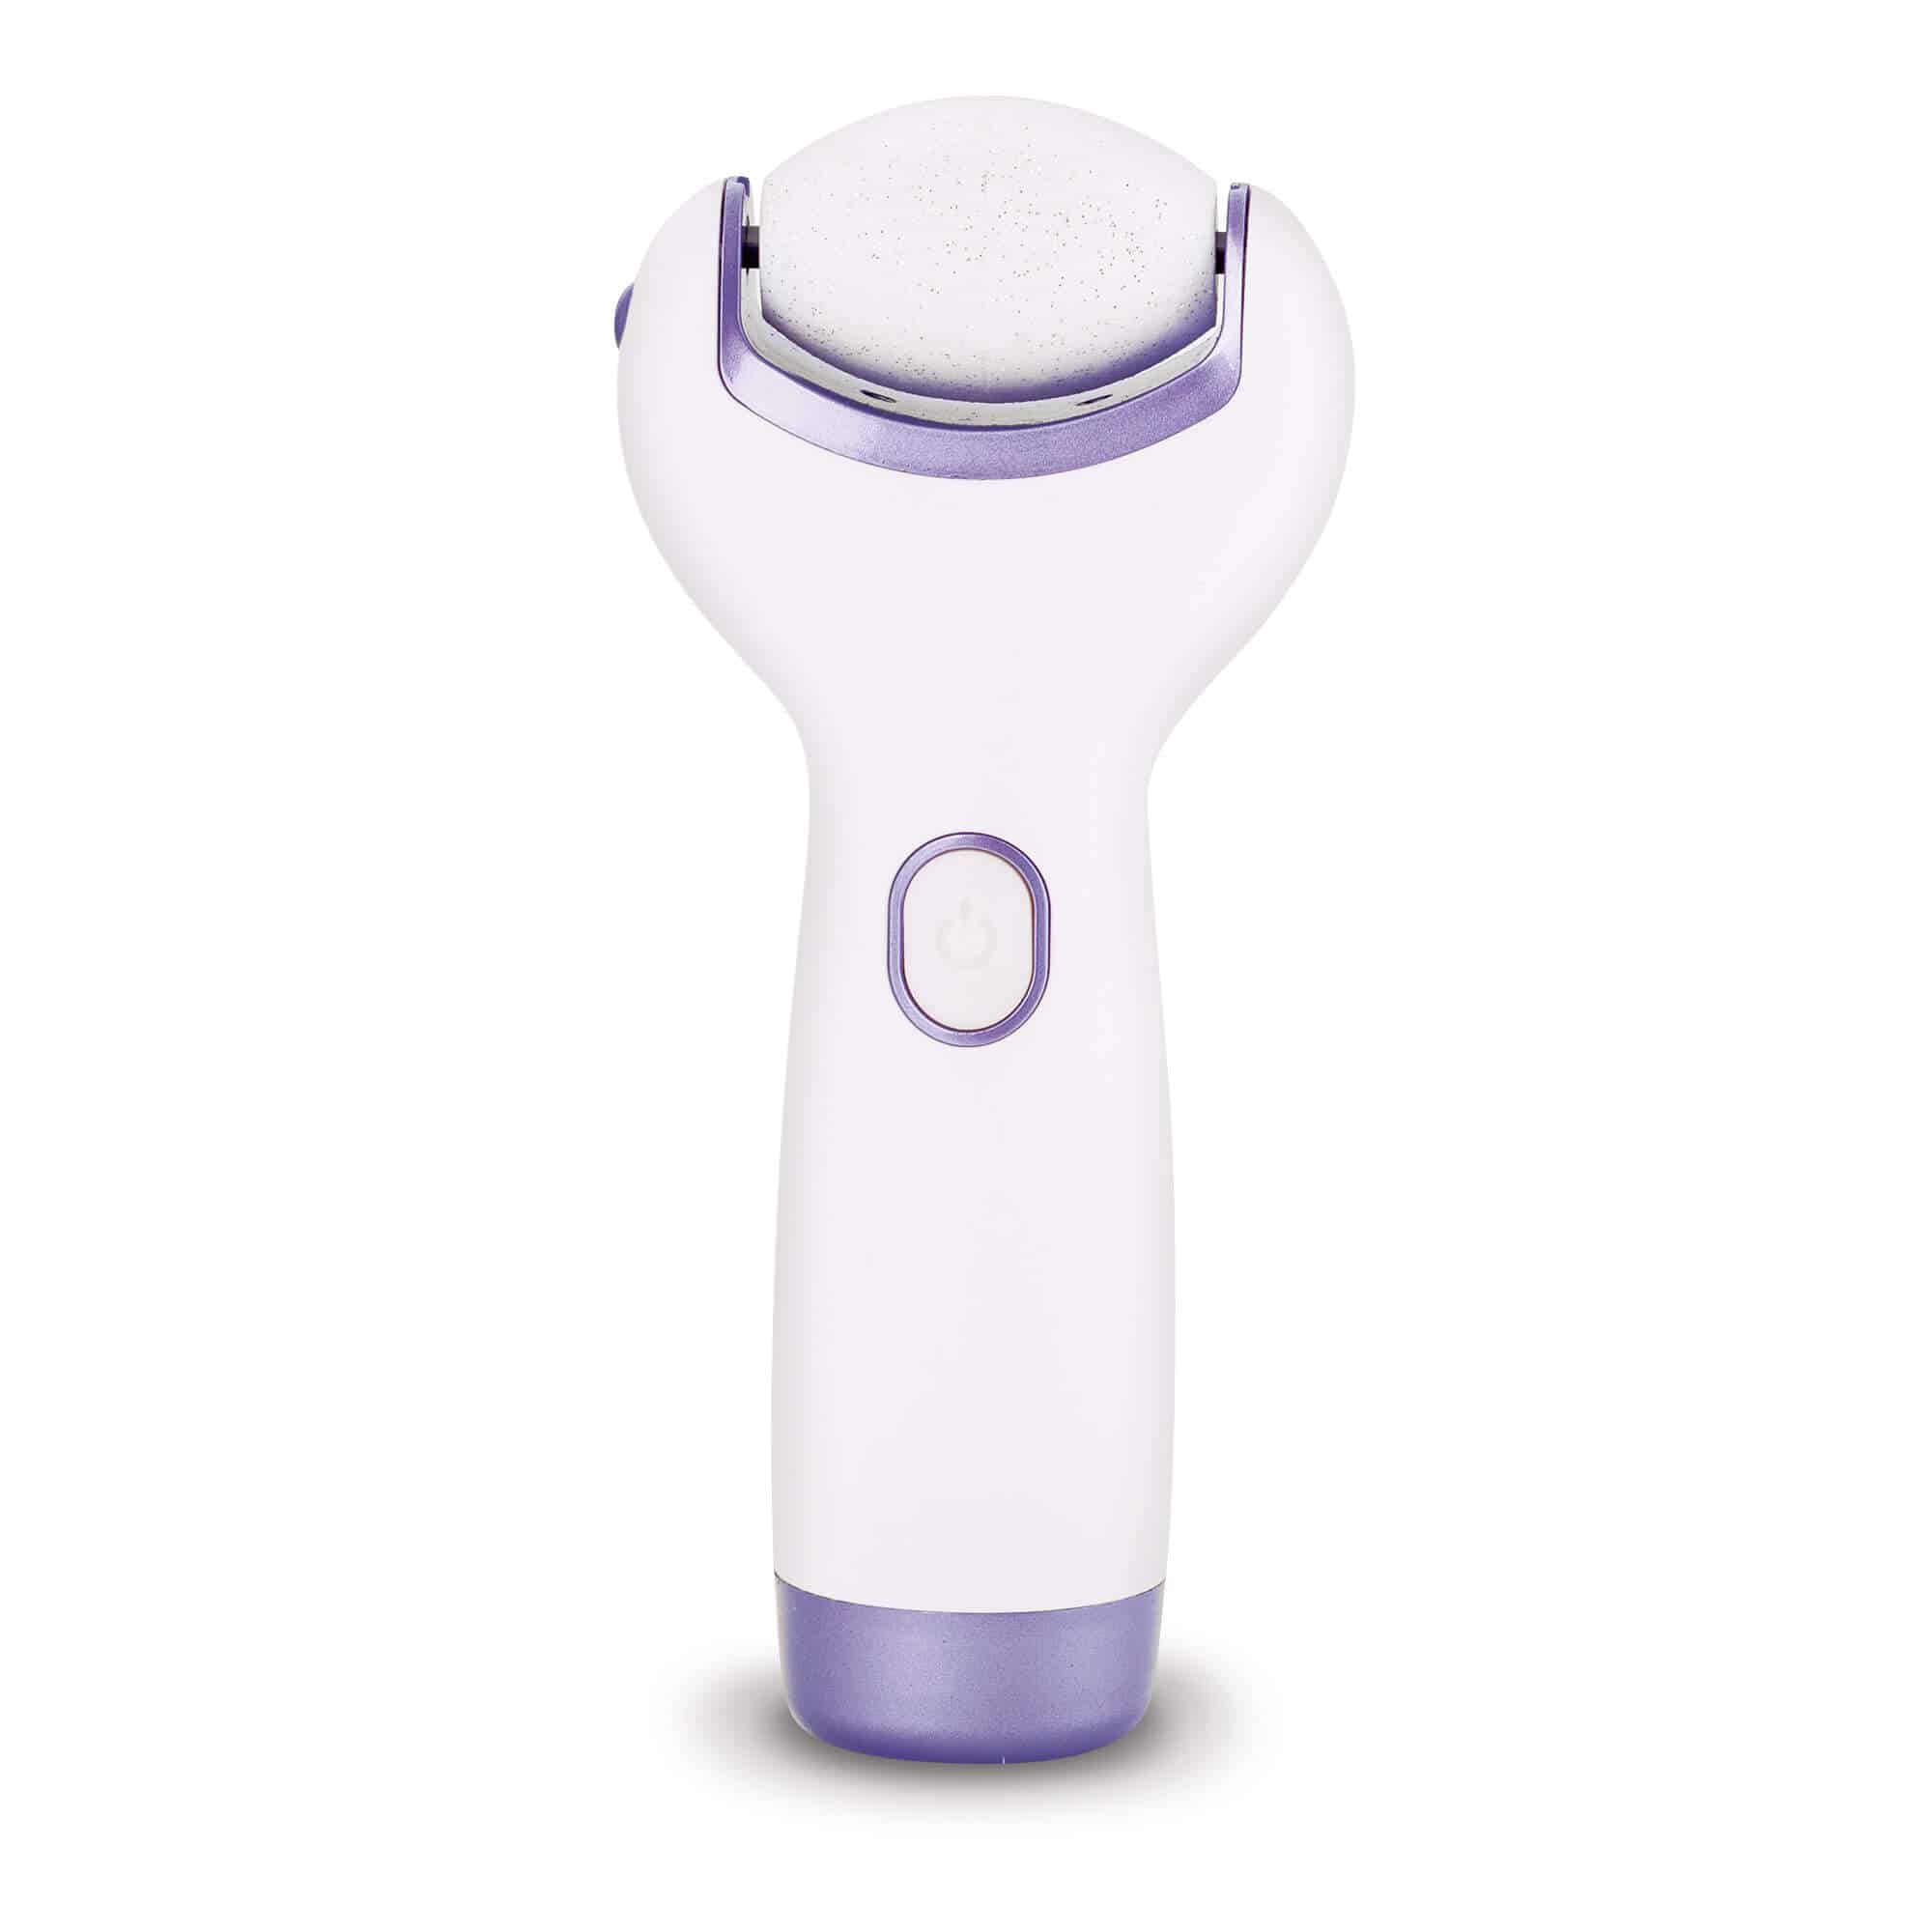 Glass Foot File Callus Remover - Foot Scrubber and Heel Scraper for Dead  Skin Removal, Foot Buffer Pedicure Tool, Perfect for Men and Women, Get  Soft